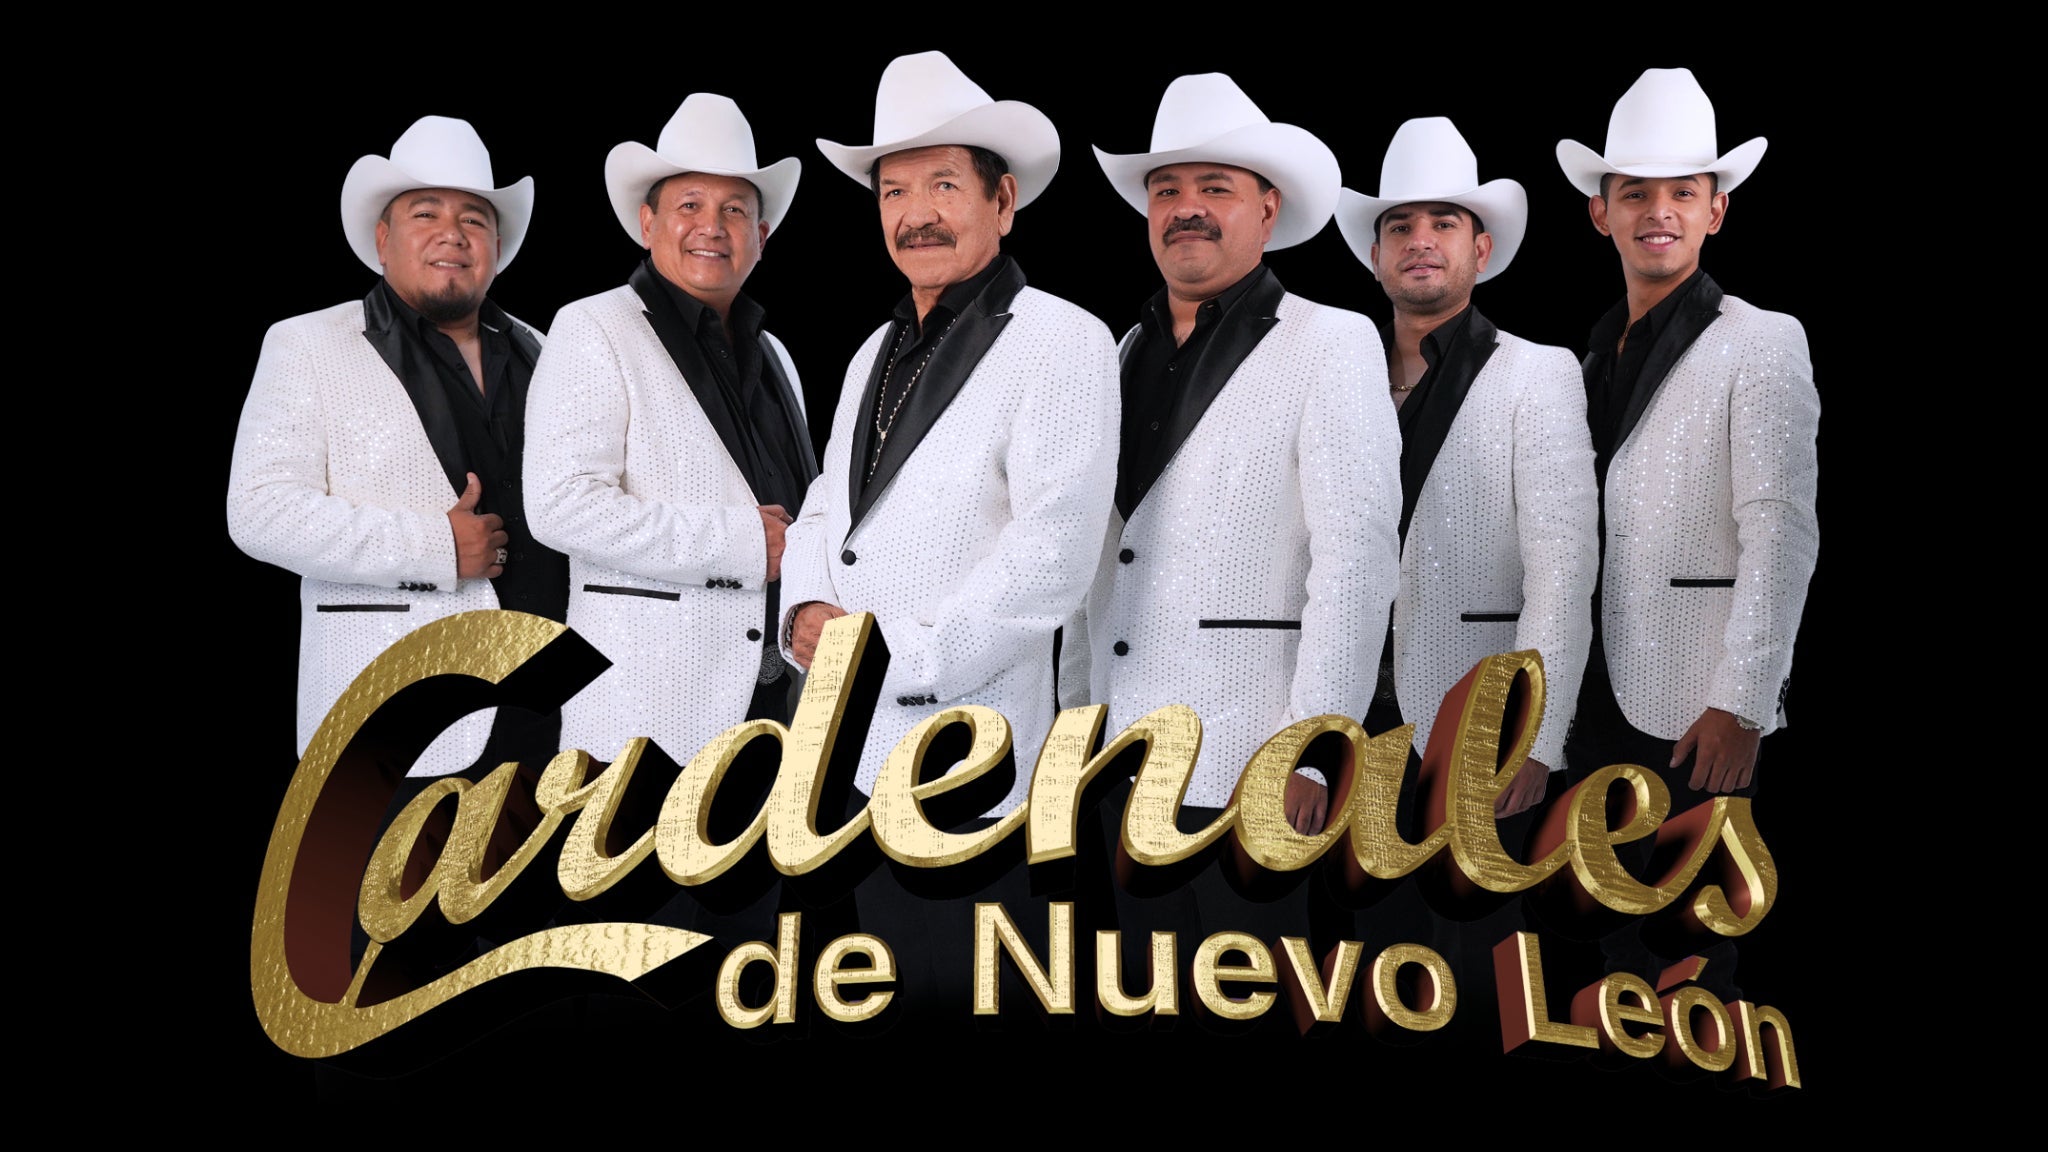 members only presale code to Los Cardenales de Nuevo Leon face value tickets in Primm at Star Of The Desert Arena at Primm Valley Resorts